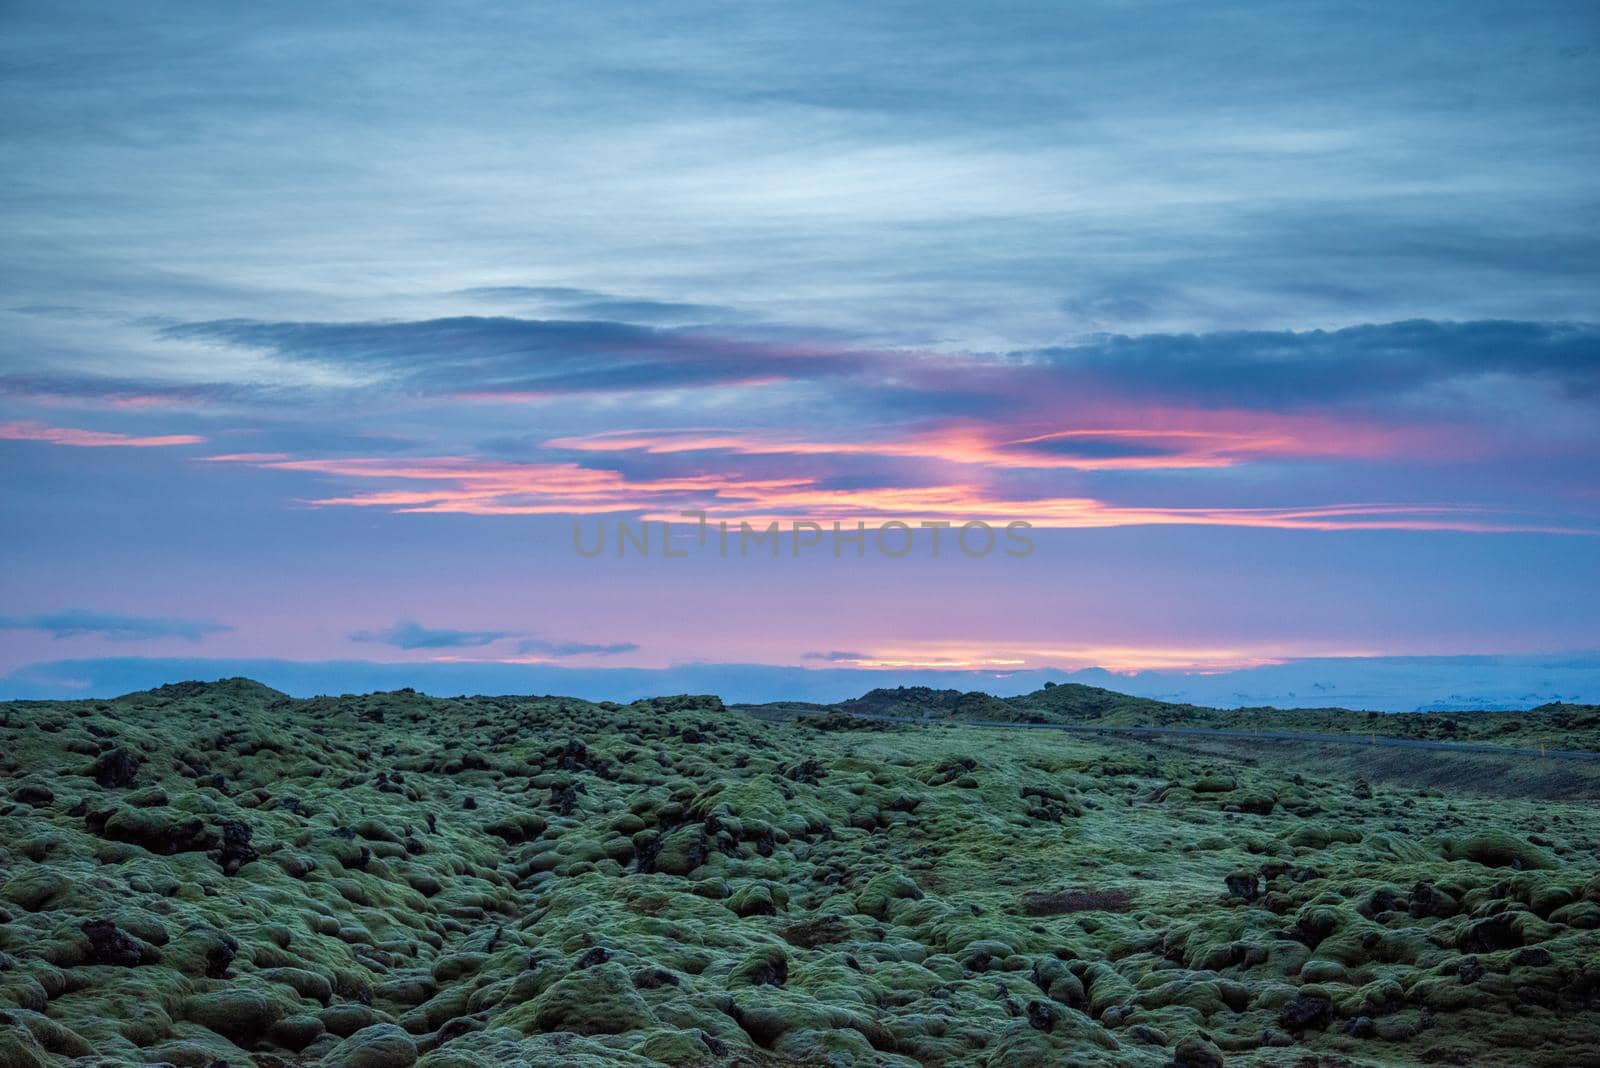 Icelandic landscape photo at sunset with volcanic rock field covered in green moss by jyurinko